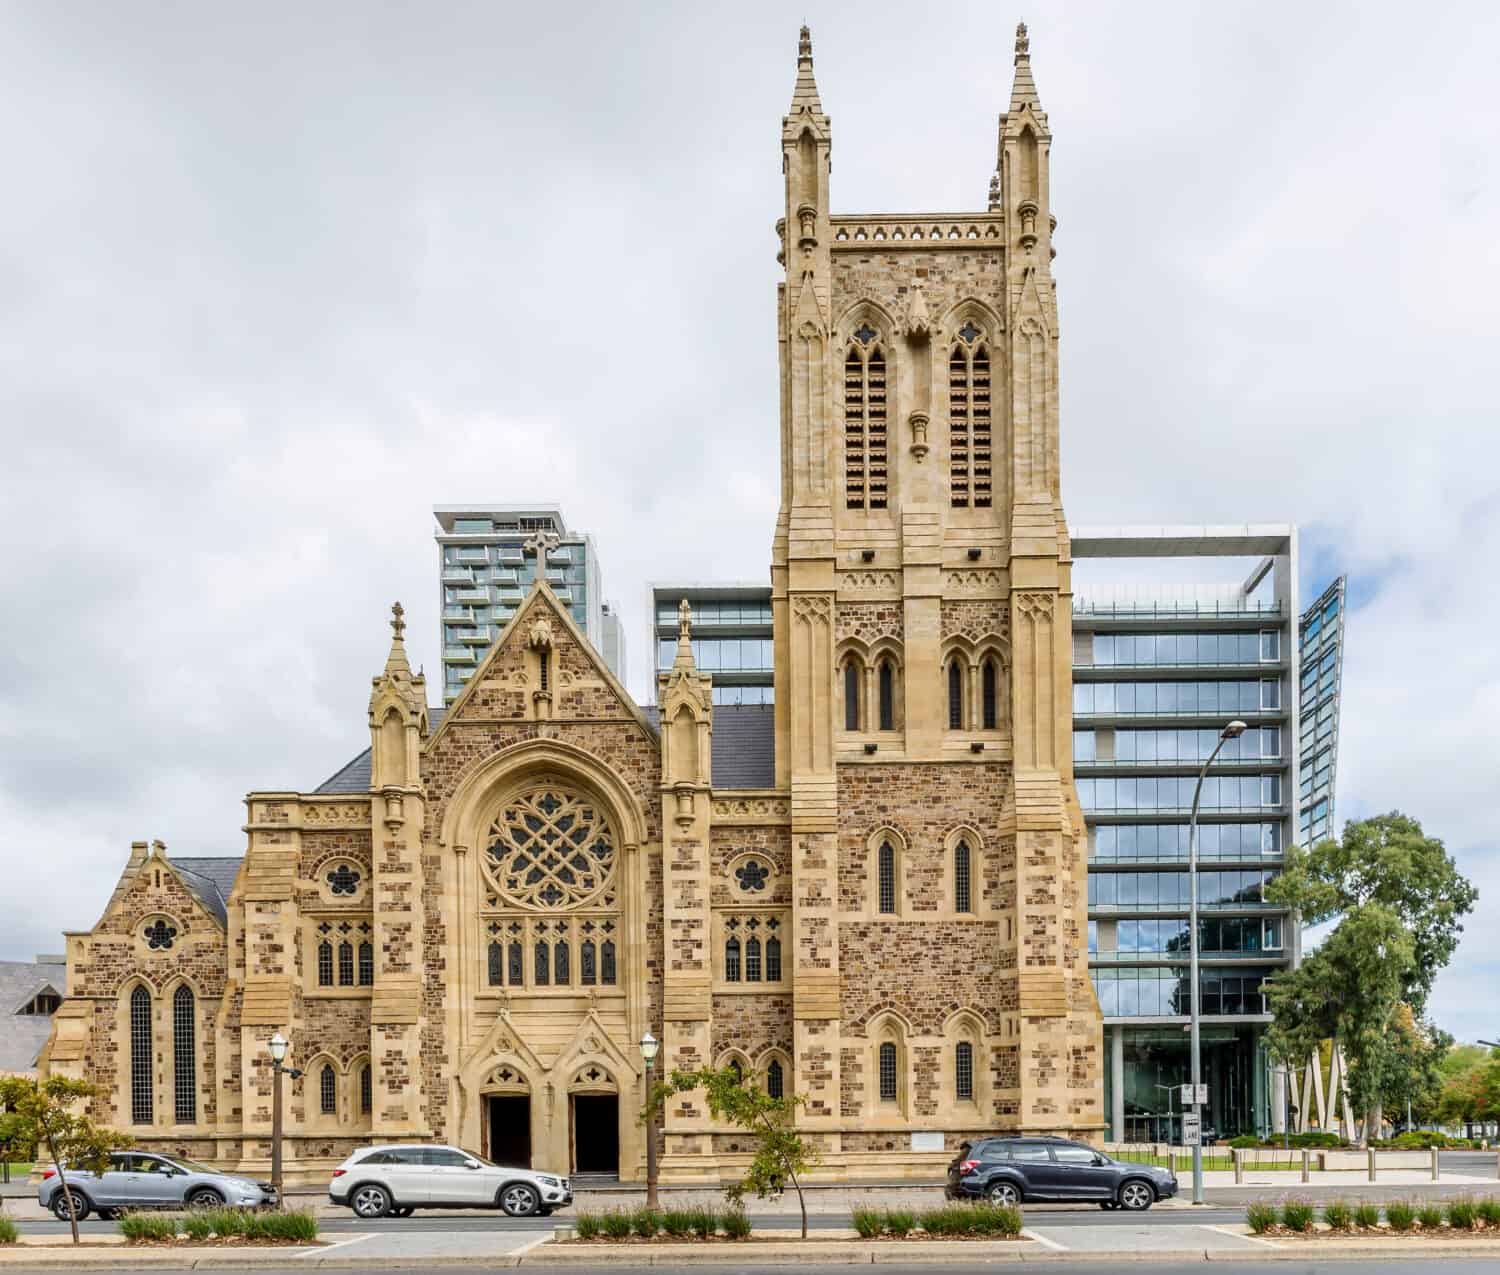 The beautiful facade of St Francis Xavier's Cathedral, Adelaide, Southern Australia